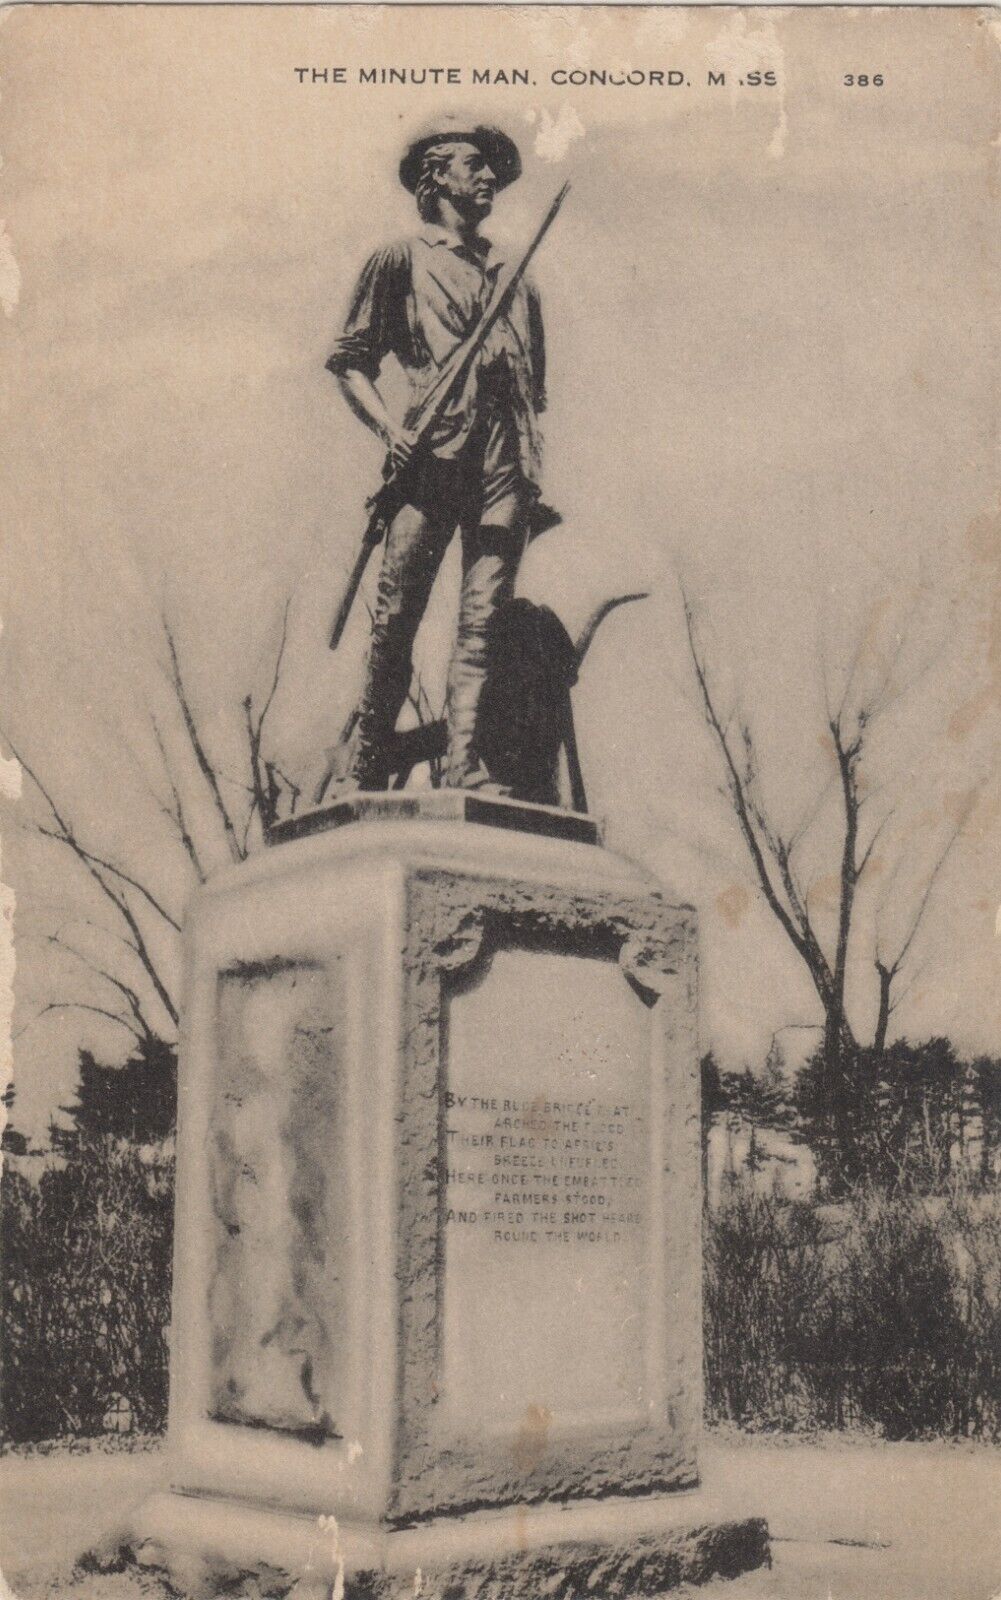 The Minute Man, 1874 Sculpture by Daniel Chester French, Concord, Massachusetts